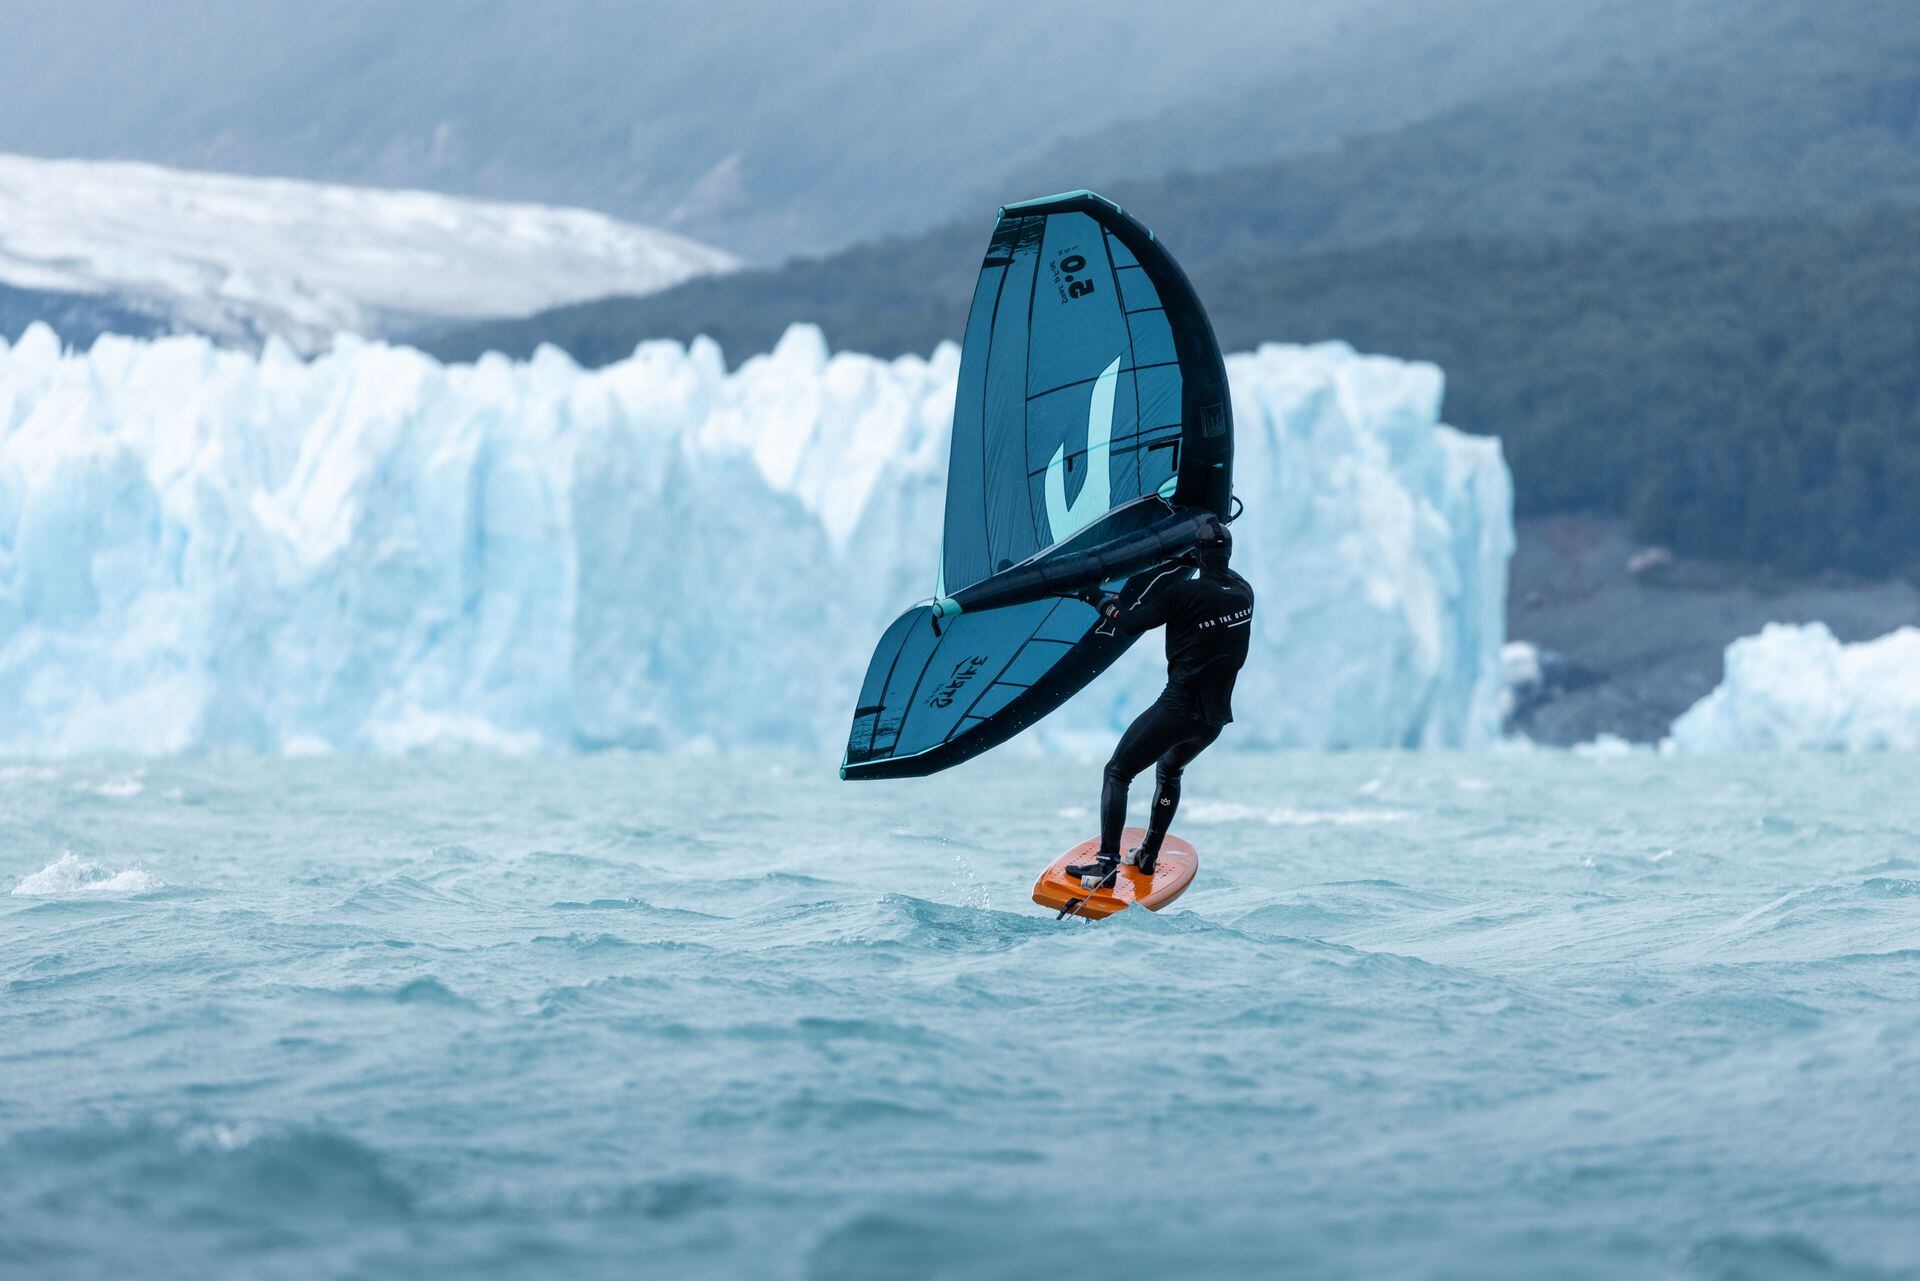 Yago Lange used all his experience in high performance to plan his expedition to the glacier